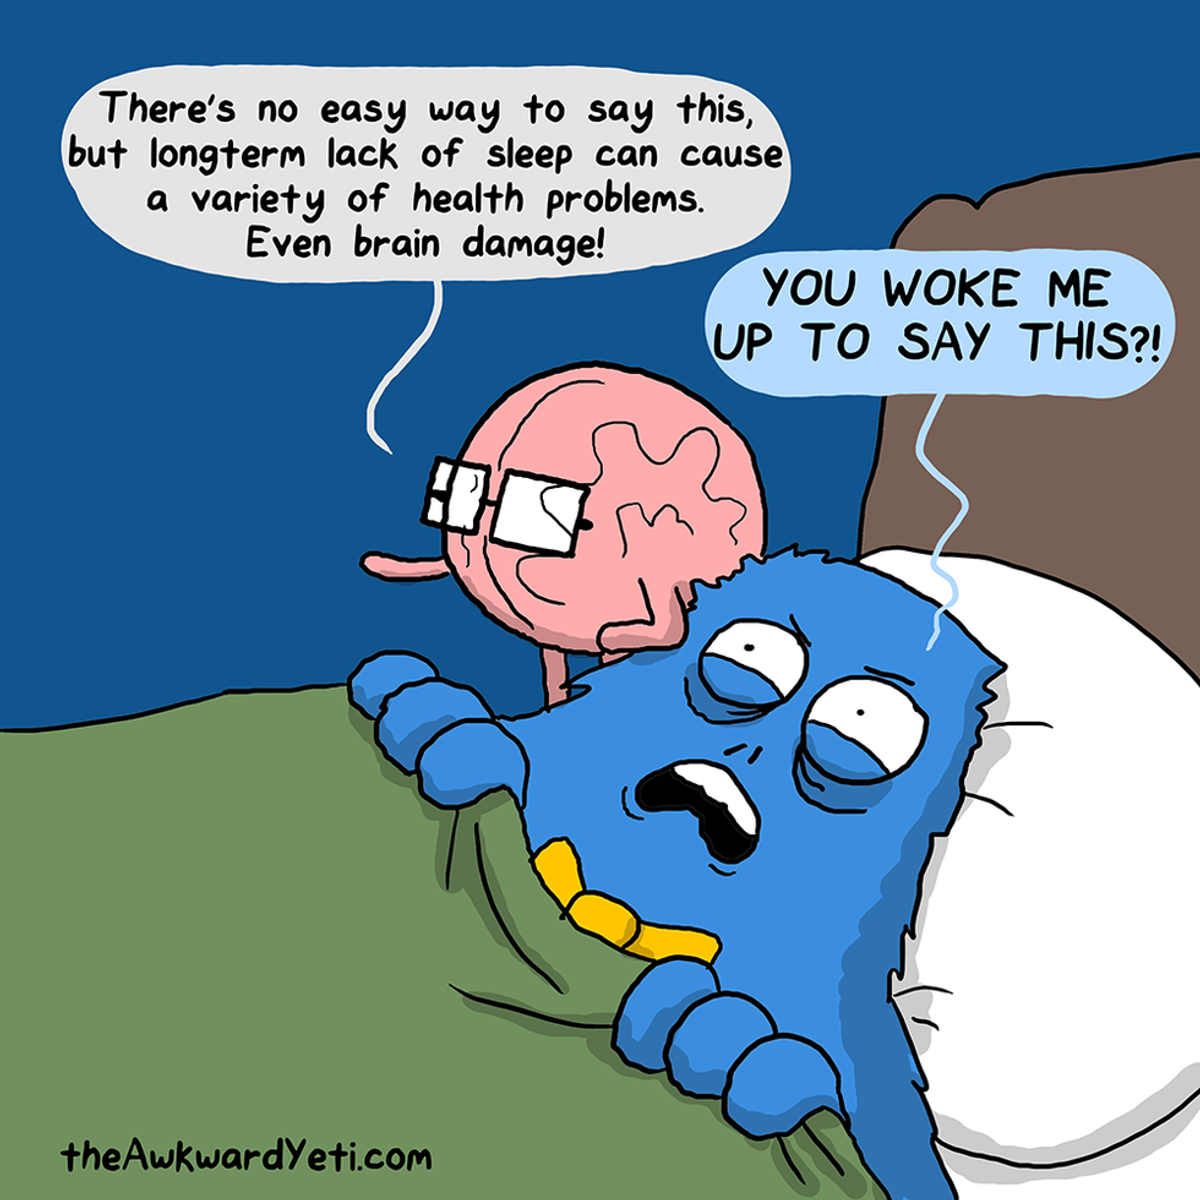 Do You Suffer From Insomnia?